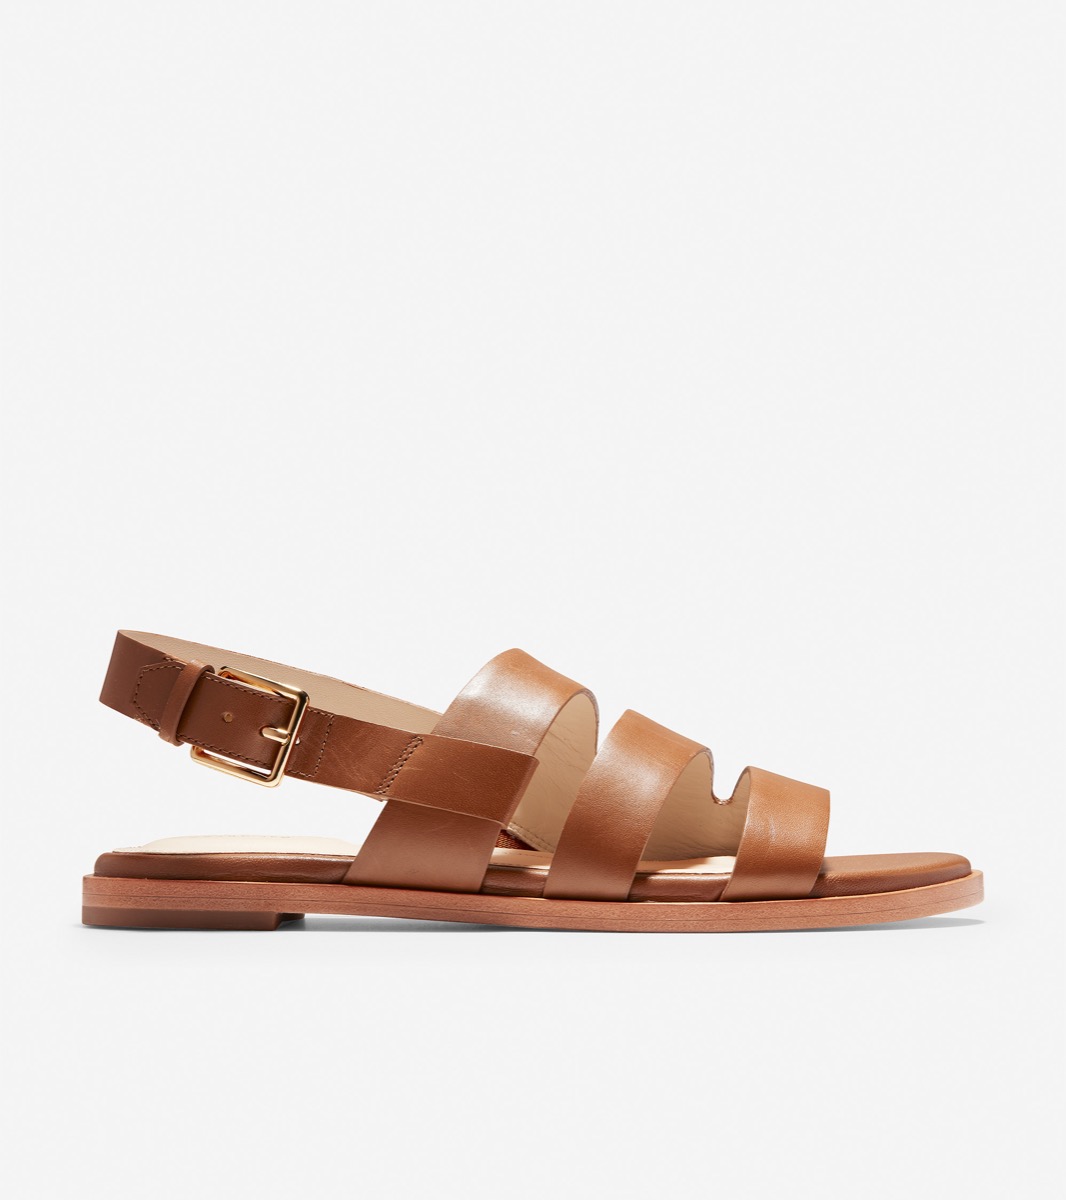 Brown leather sandal on white background